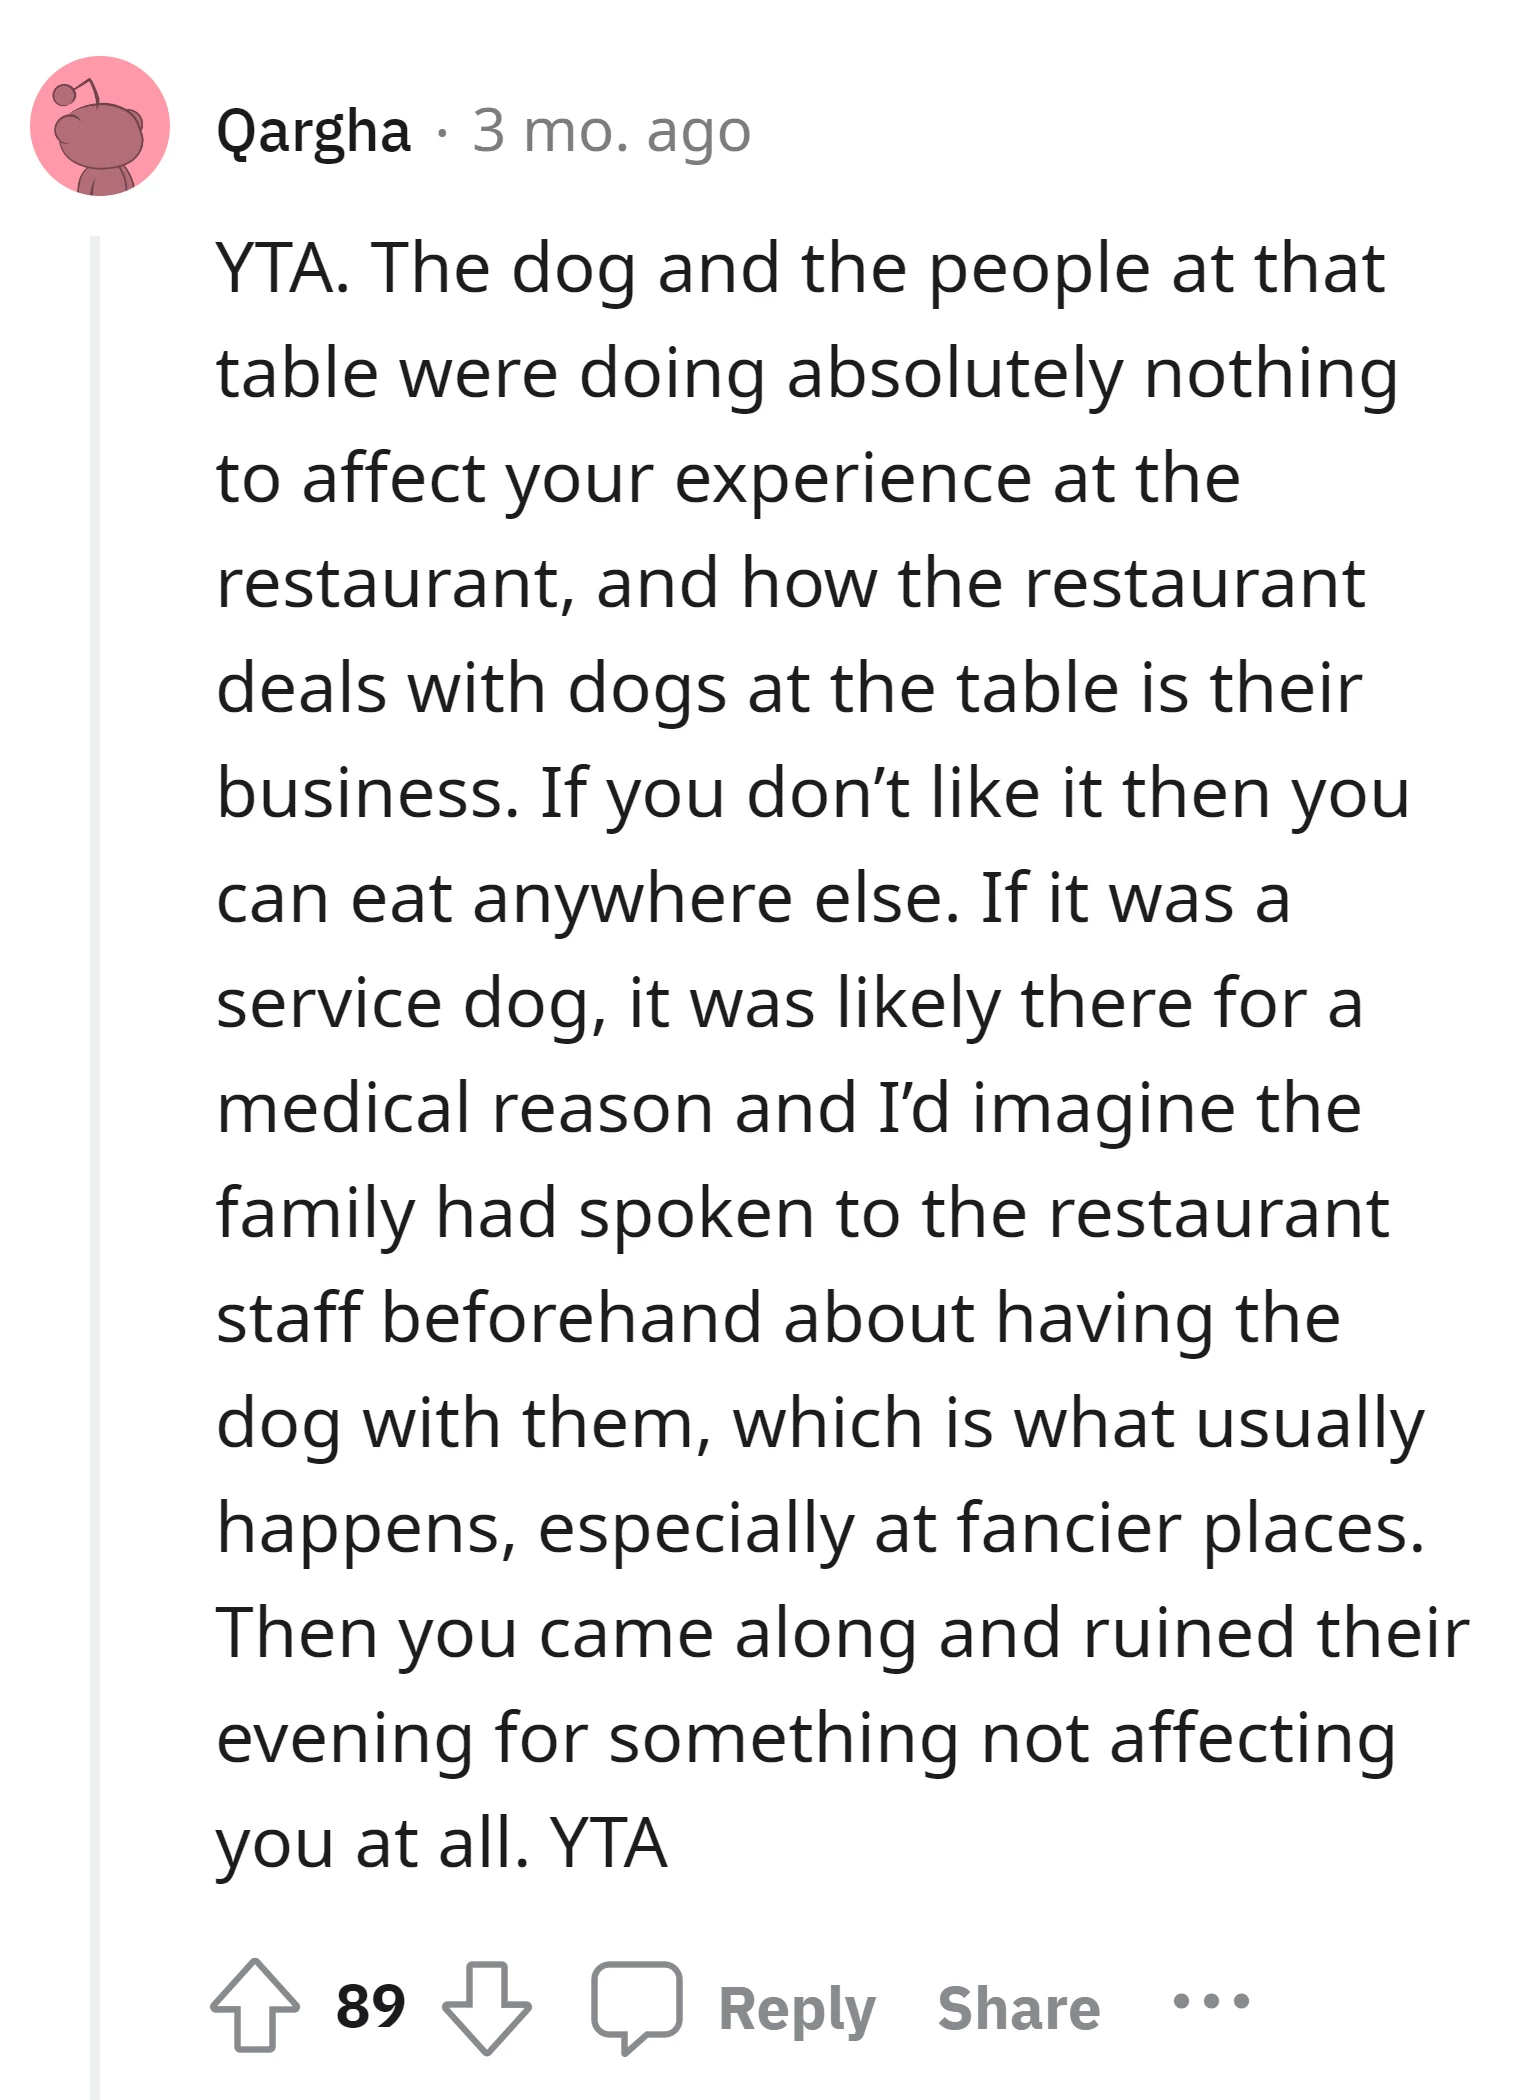 Commenter criticizes the OP for potentially disrupting a family's evening without cause